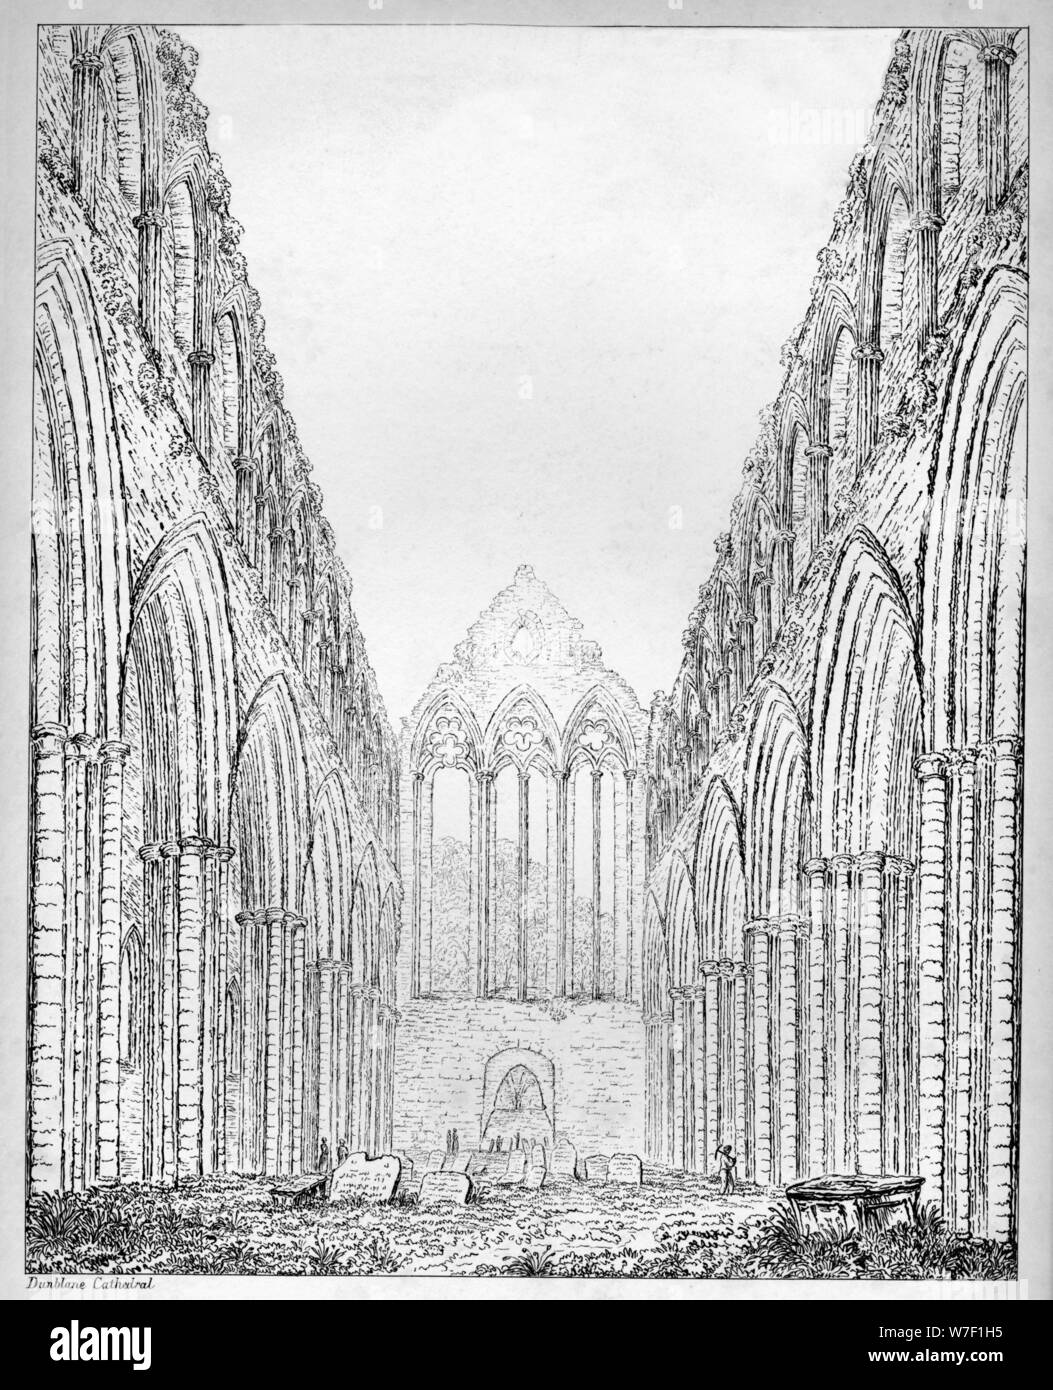 'Dunblane Cattedrale', C1812. Artista: S Leith. Foto Stock